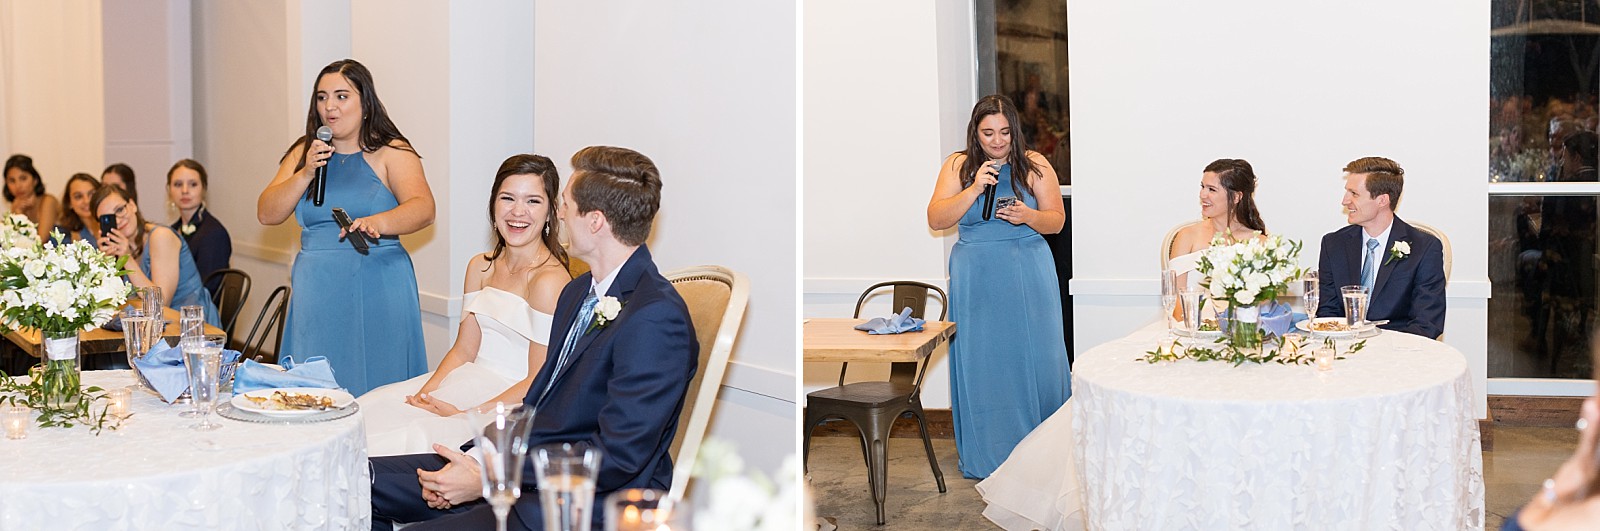 Maid of honor giving her speech  | The Meadows in Raleigh | Raleigh NC Wedding Photographer